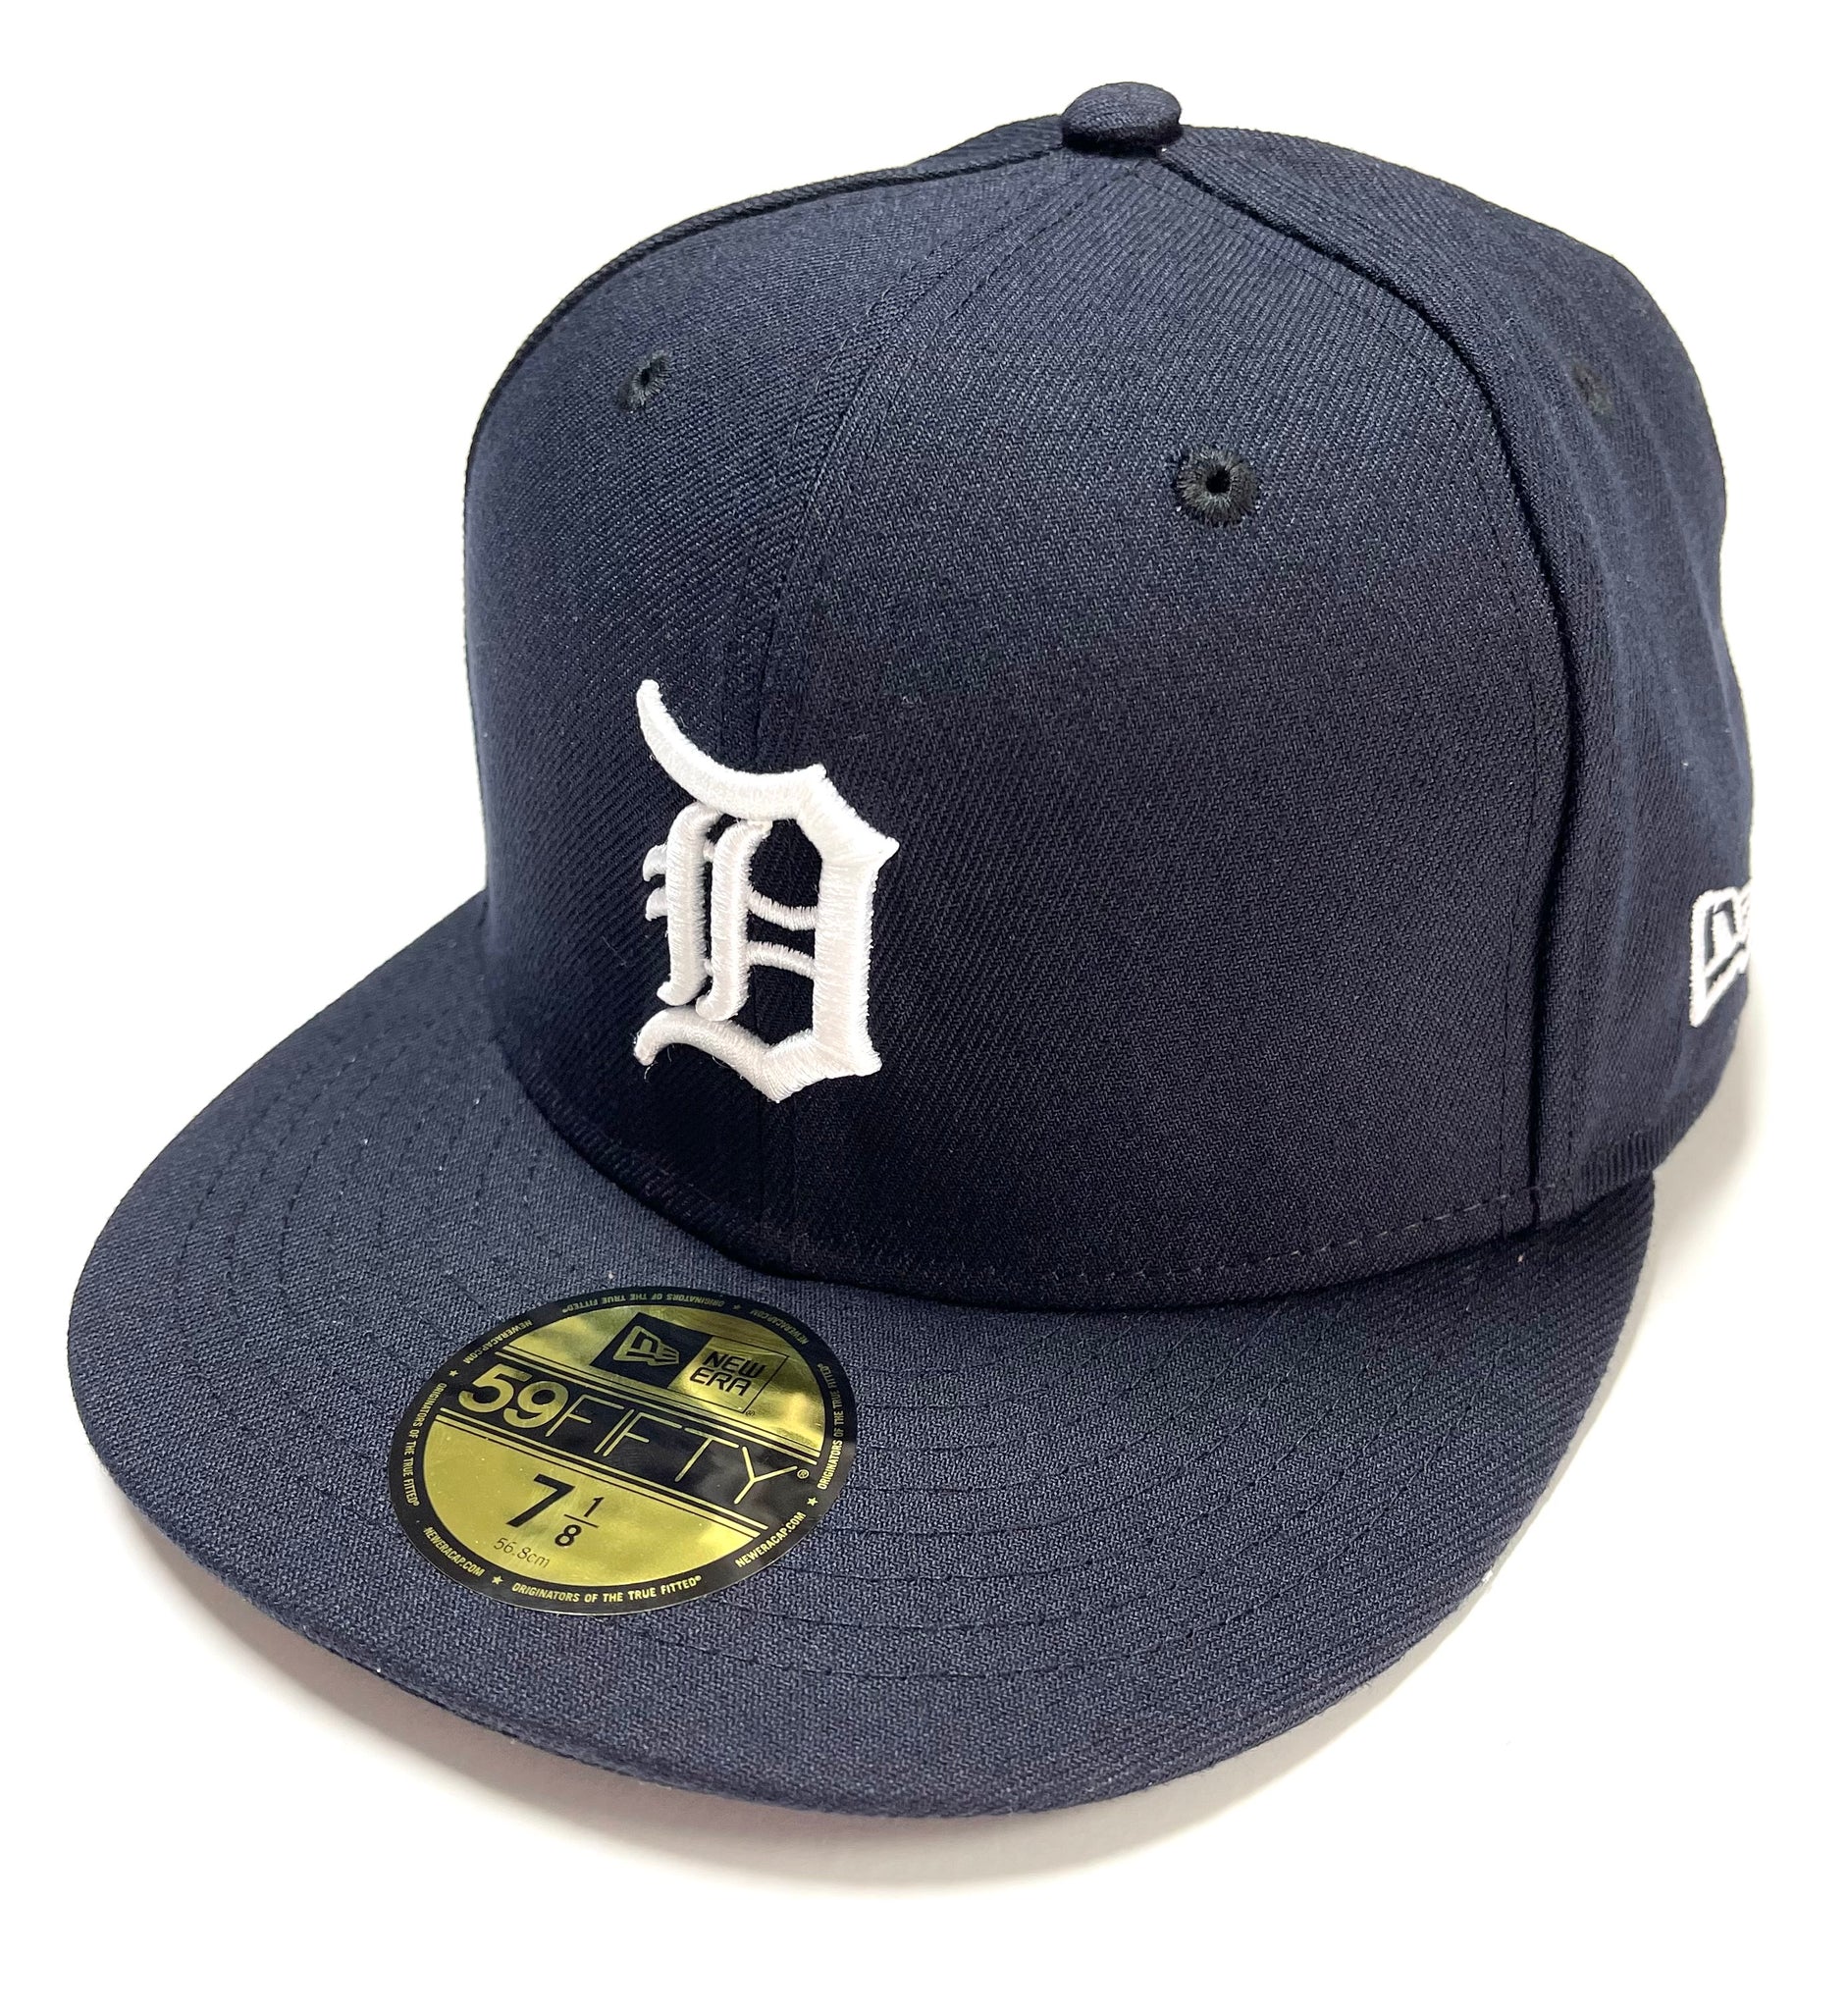 NEW ERA “HOME ONFIELD 2019” DETROIT TIGERS FITTED HAT (NAVY/WHITE